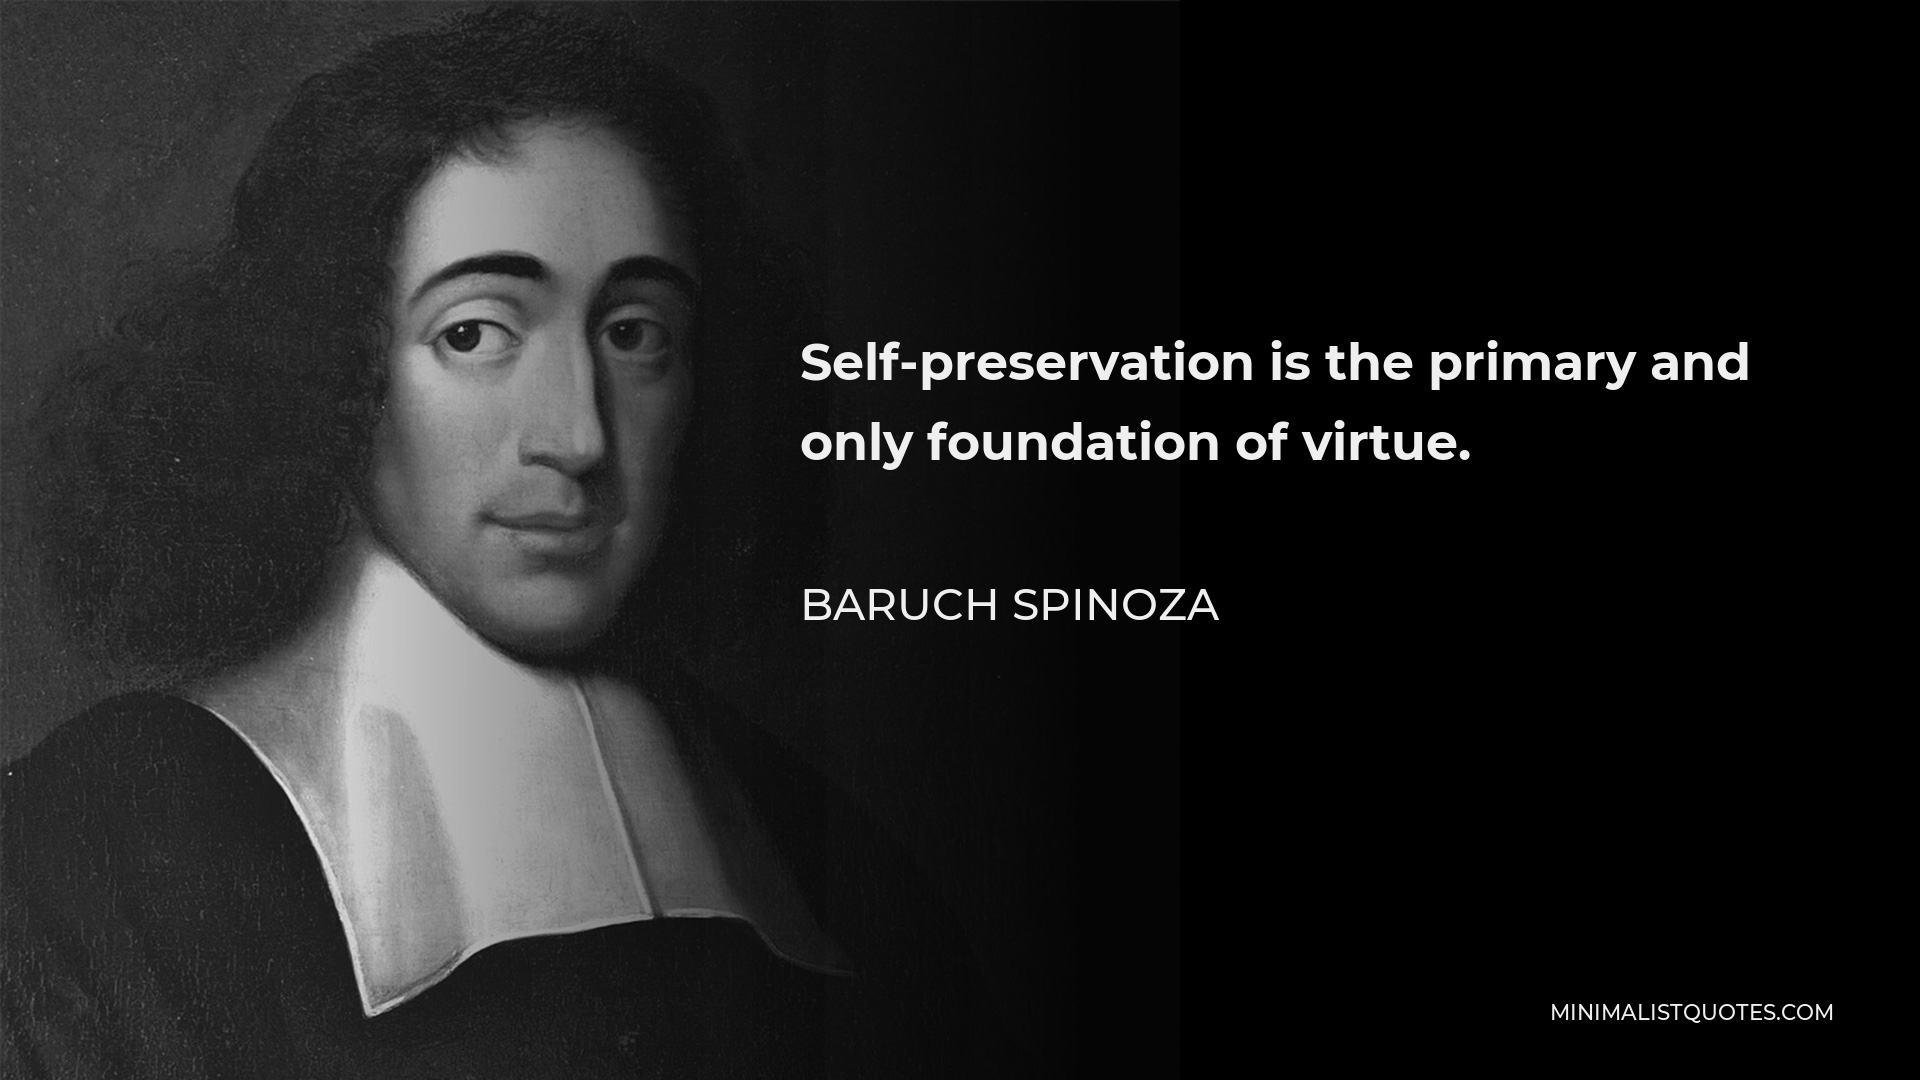 Baruch Spinoza Quote - Self-preservation is the primary and only foundation of virtue.